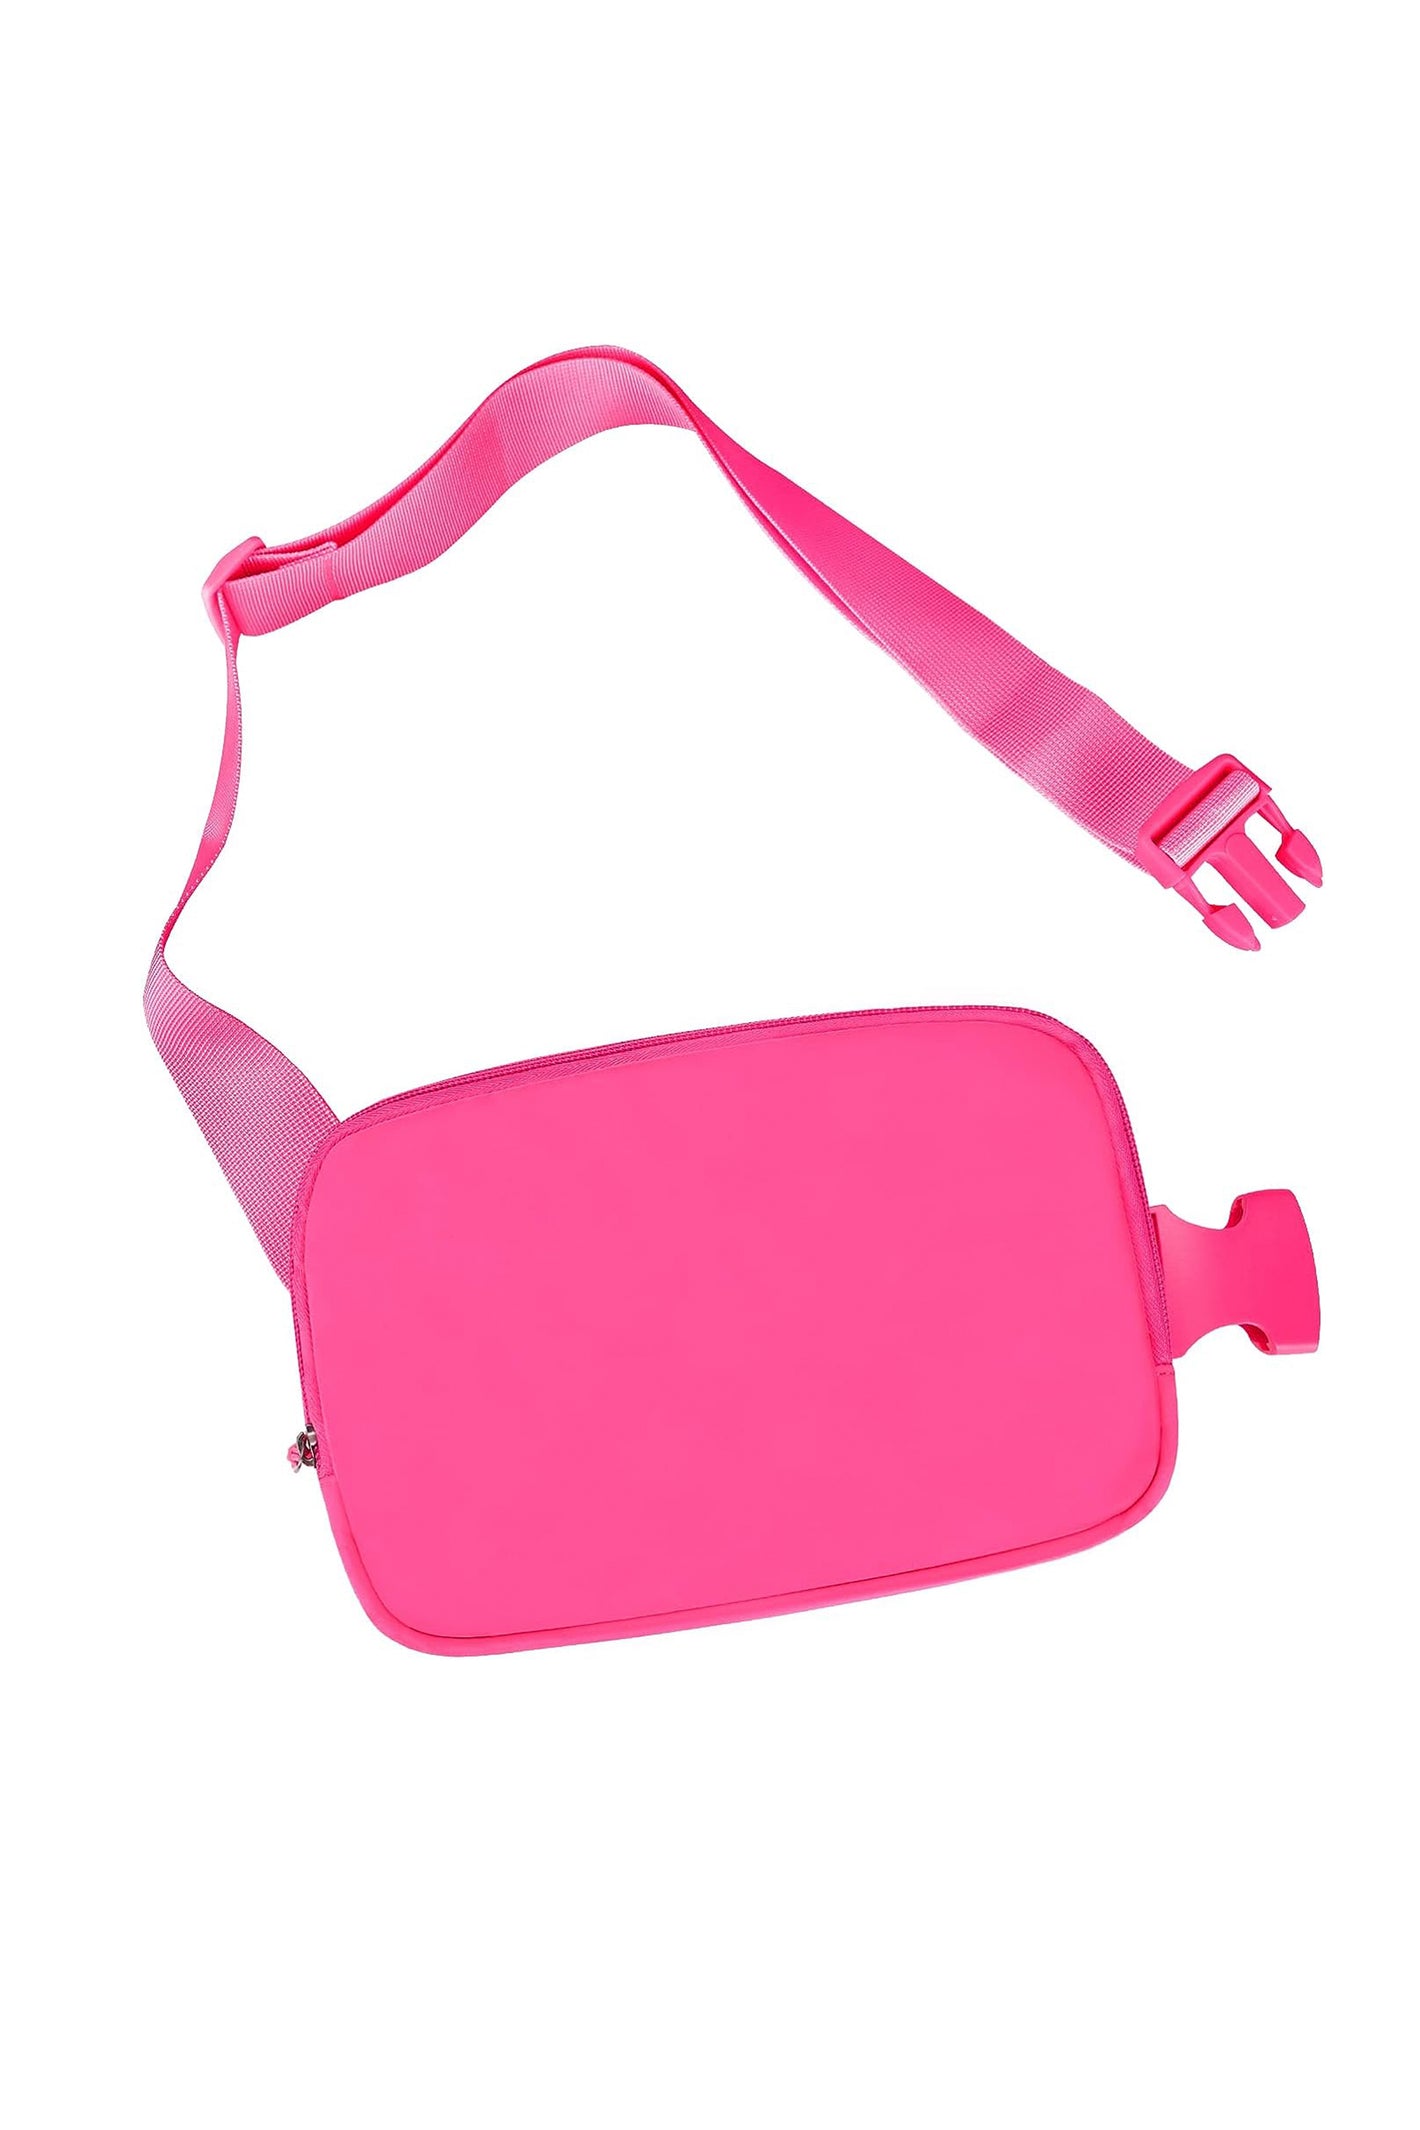 5316 - Fanny Pack/ Pink